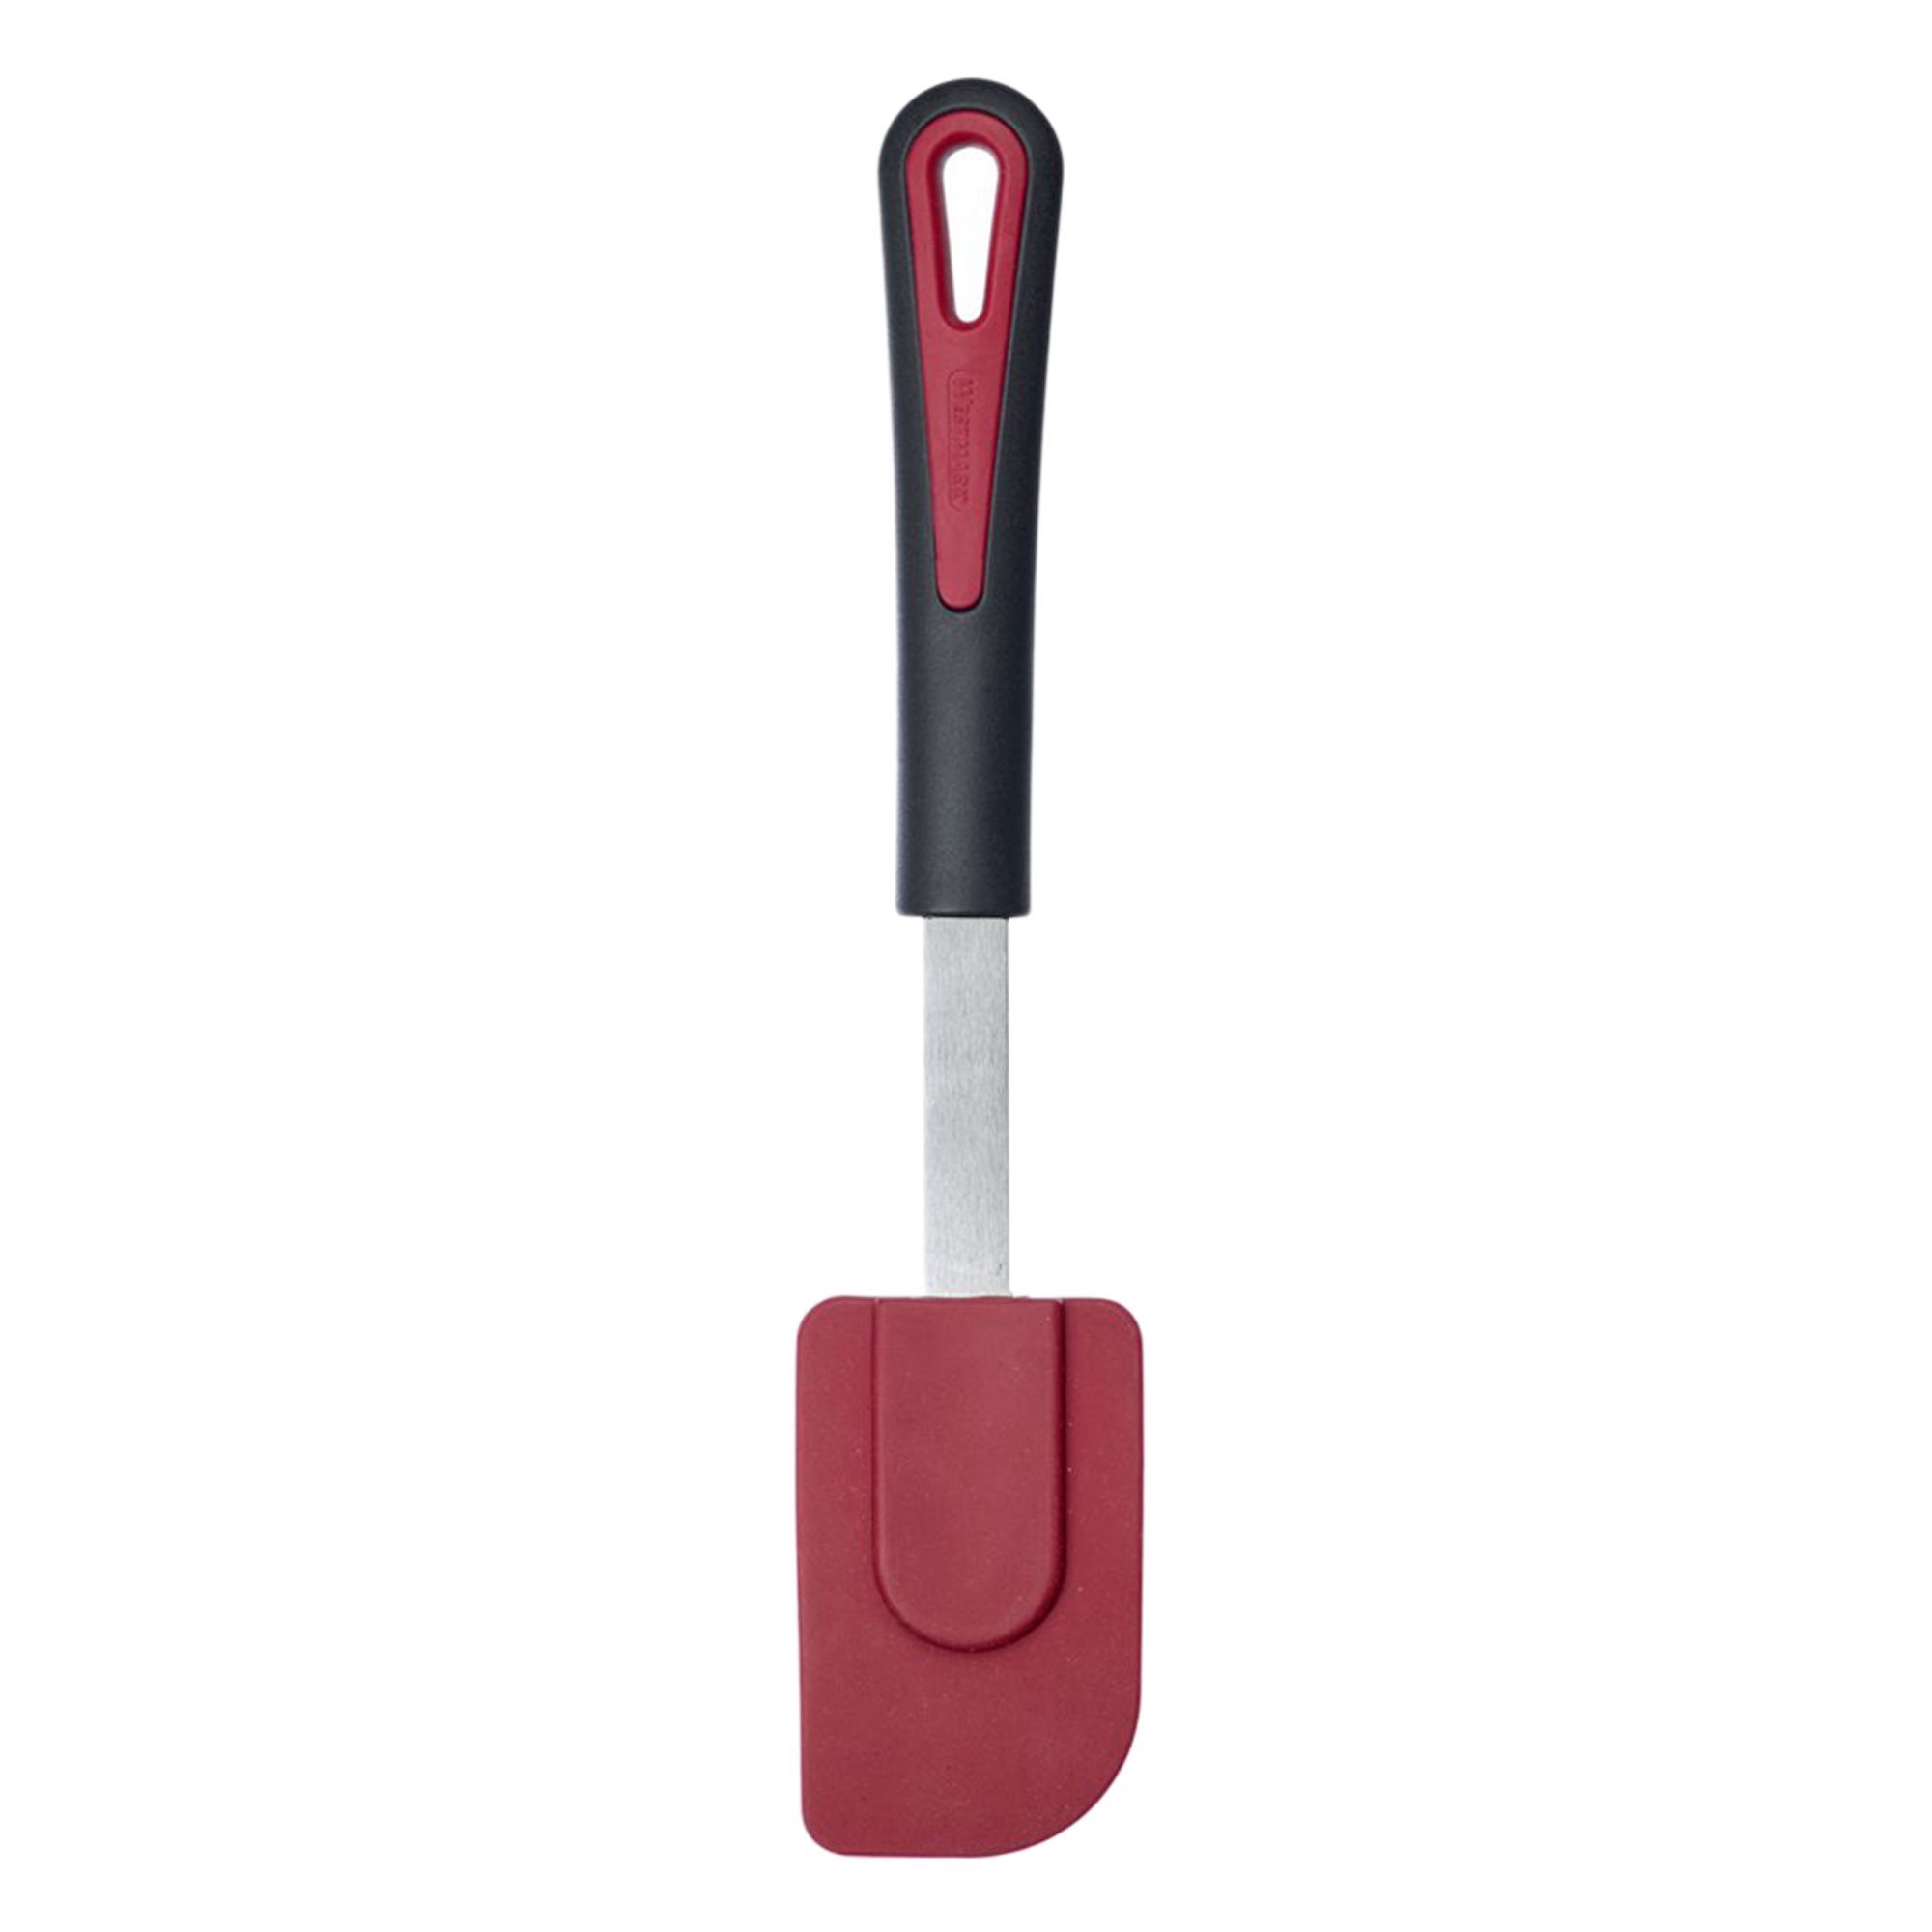 Kitchen Set with Masher, Tongs, Skimmer, Spatula, and Brush, Red